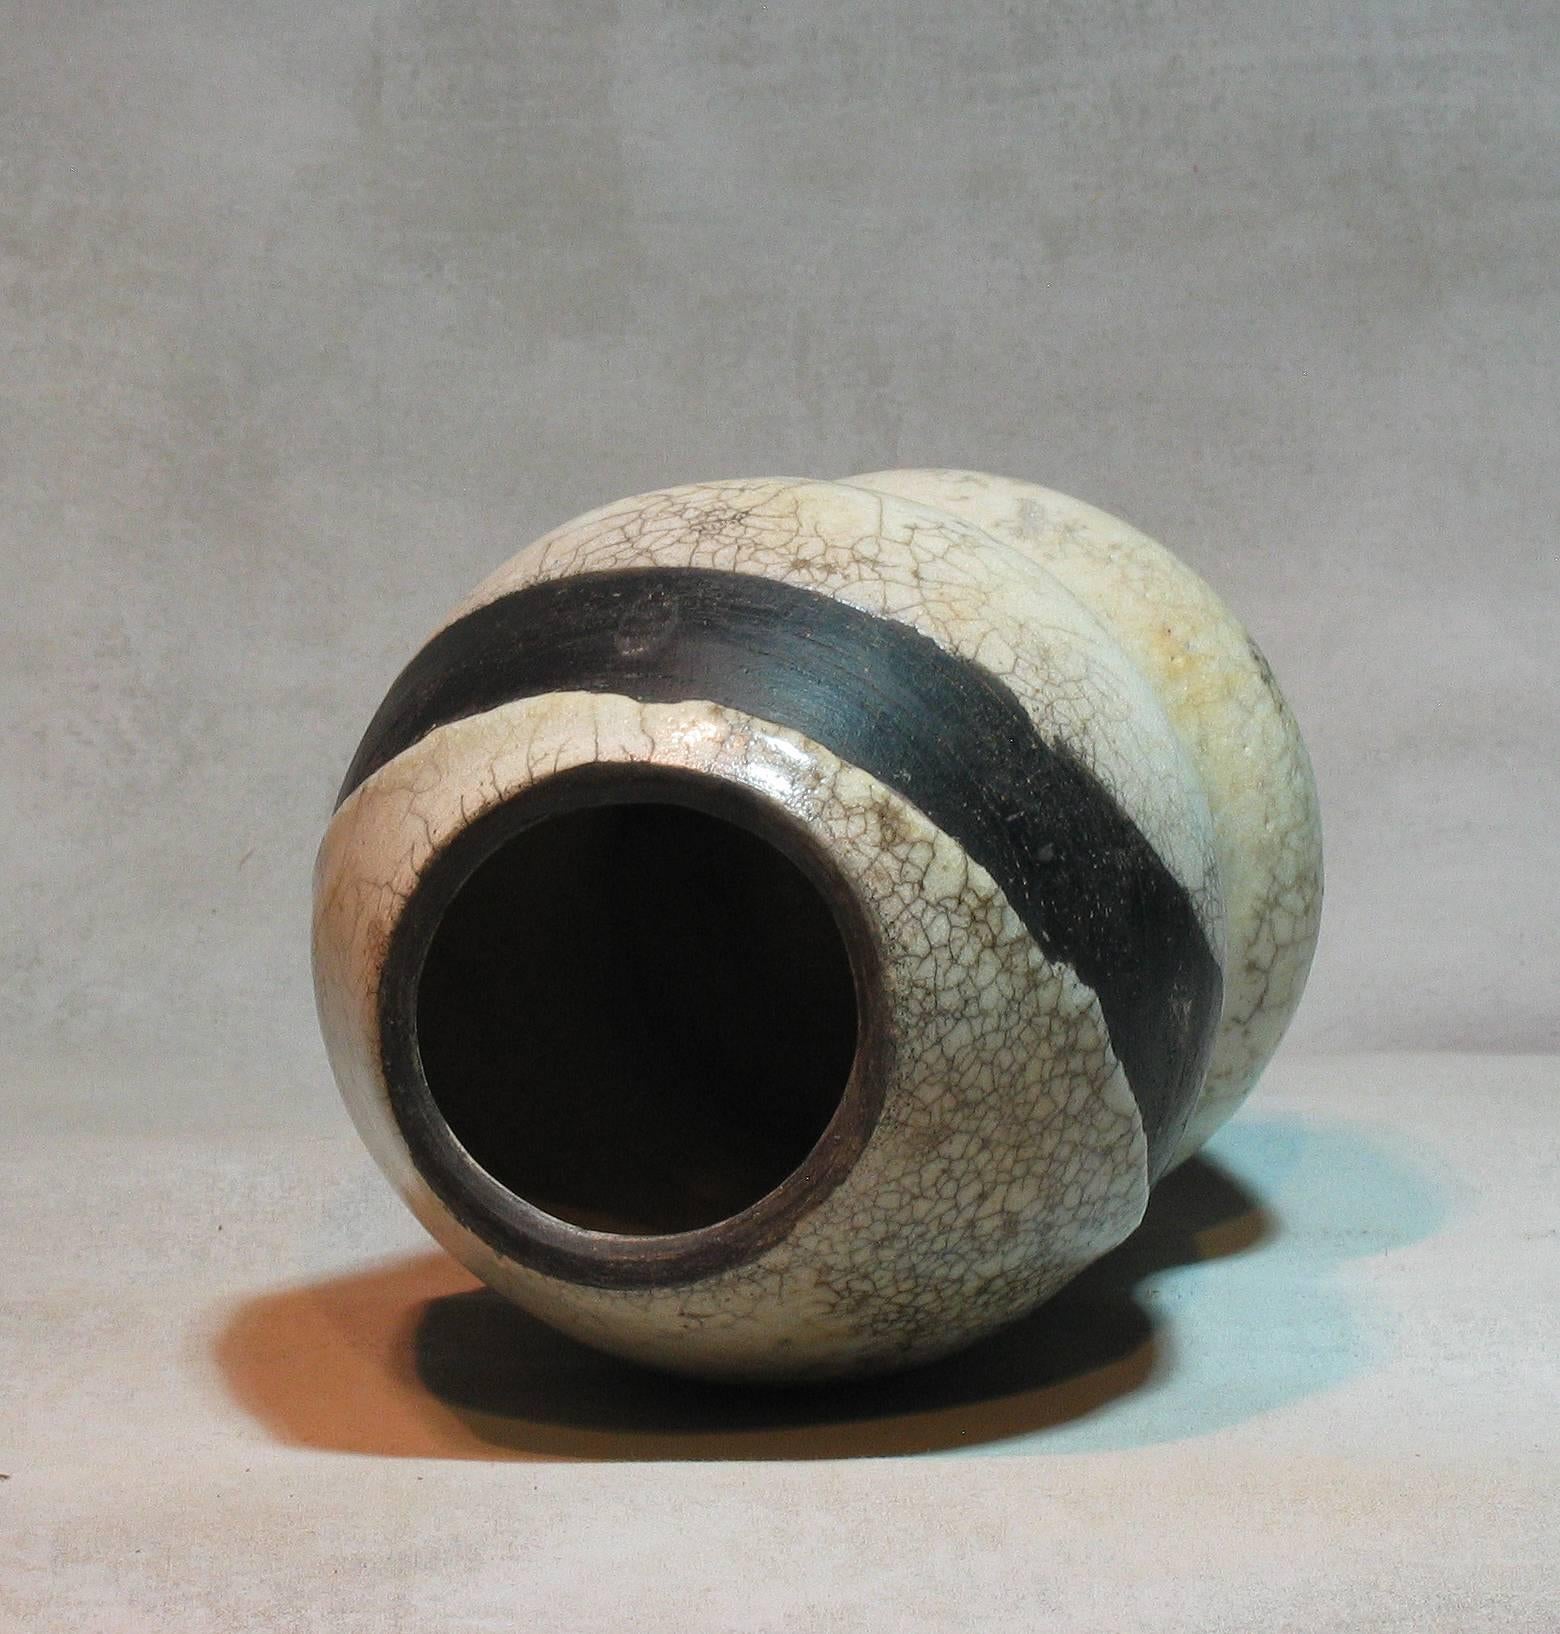 Artistic Double Gourd Form Raku Pottery Vase In Good Condition For Sale In Ottawa, Ontario